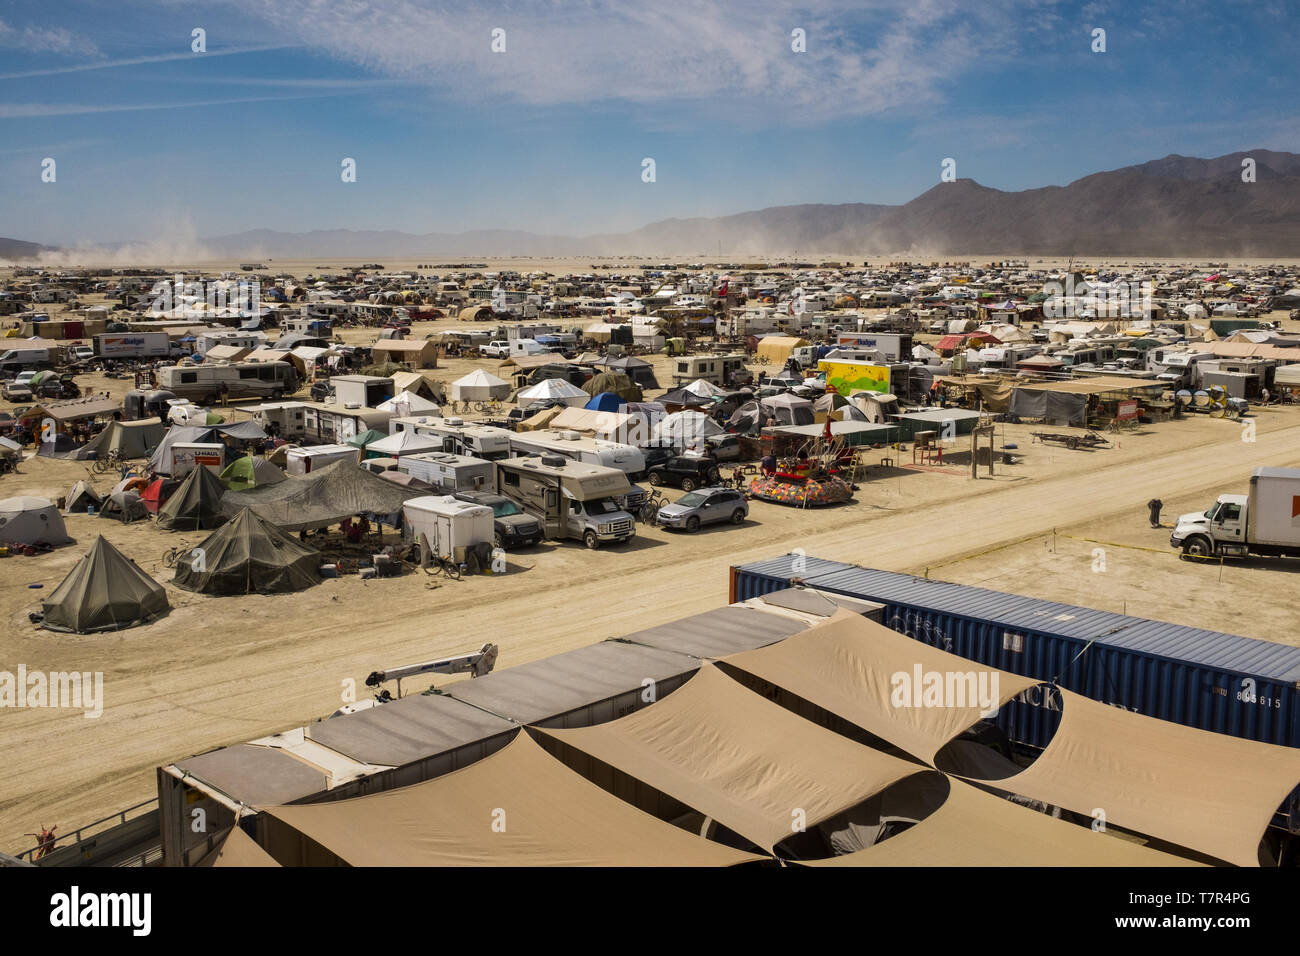 A view across the dust covered camps at Burning Man, almost looks like a refugee camp Stock Photo